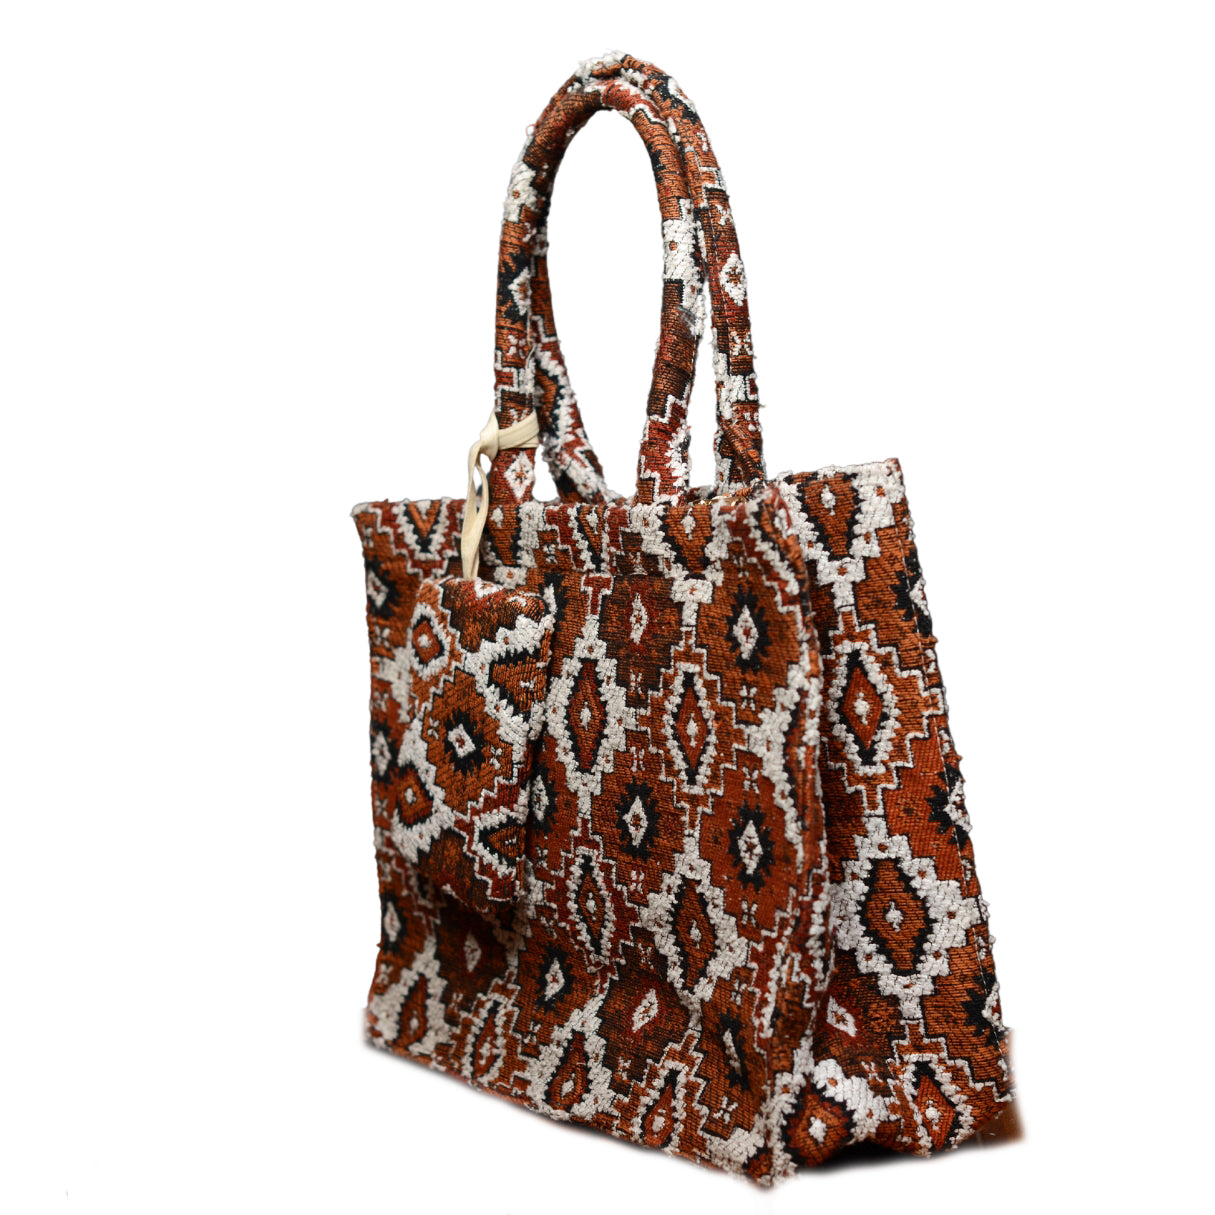 Brown and White Box Style Tote bag